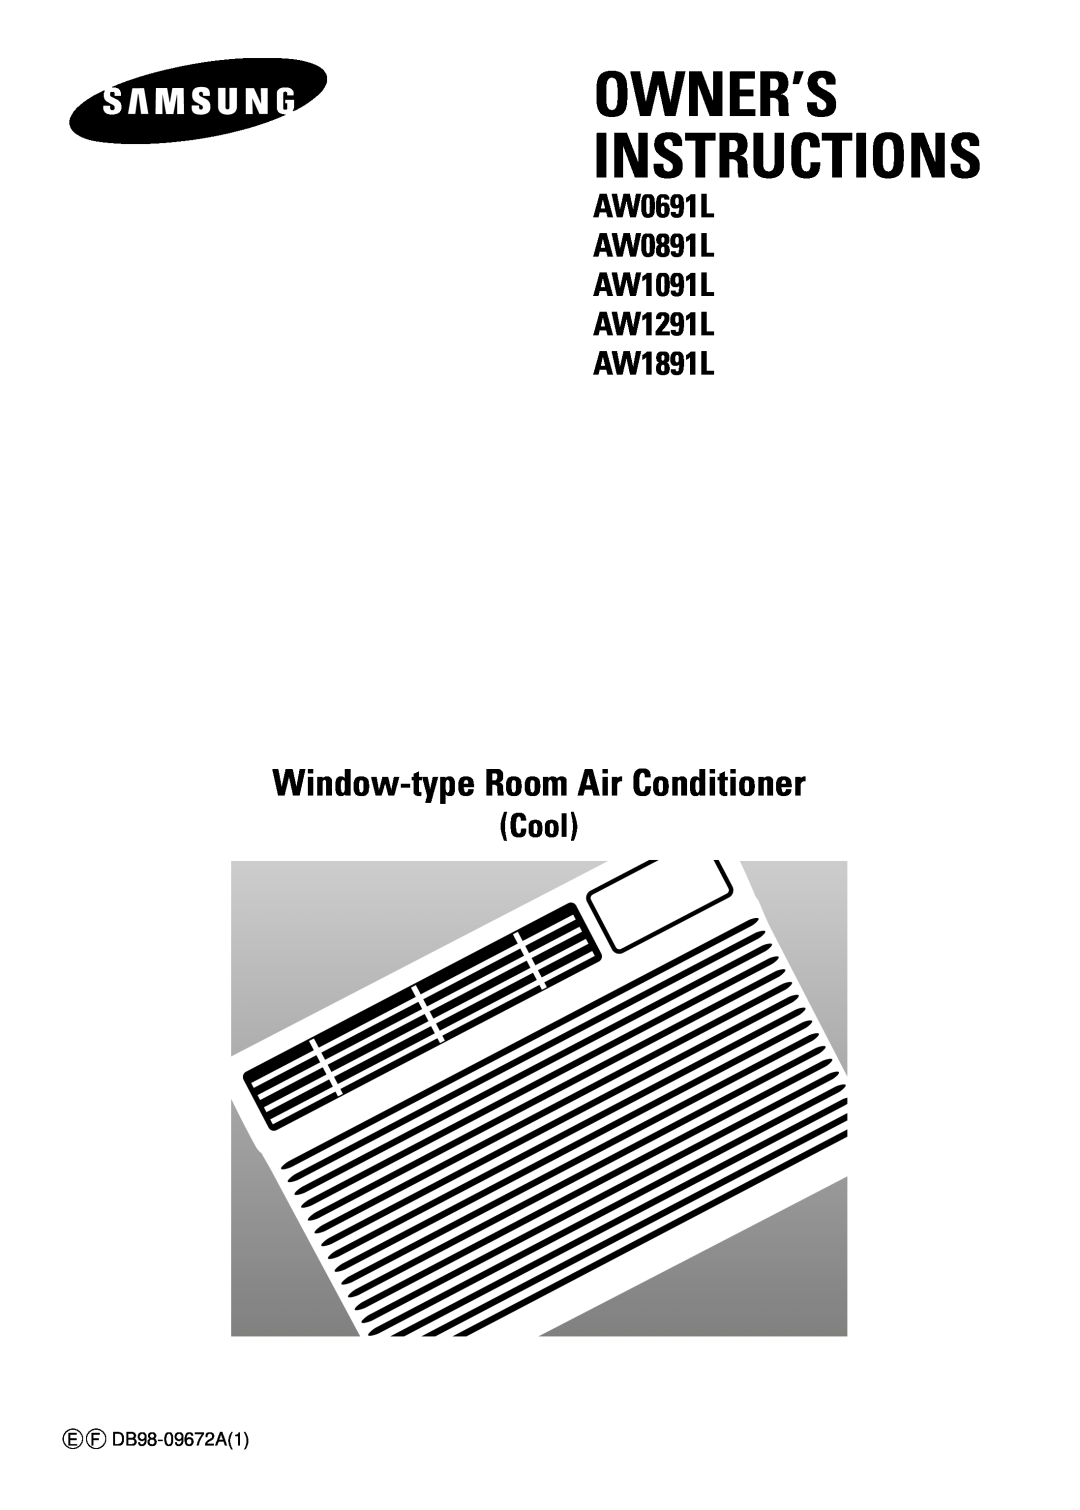 Samsung manual Owner’S Instructions, Window-typeRoom Air Conditioner, AW0691L AW0891L AW1091L AW1291L AW1891L, Cool 